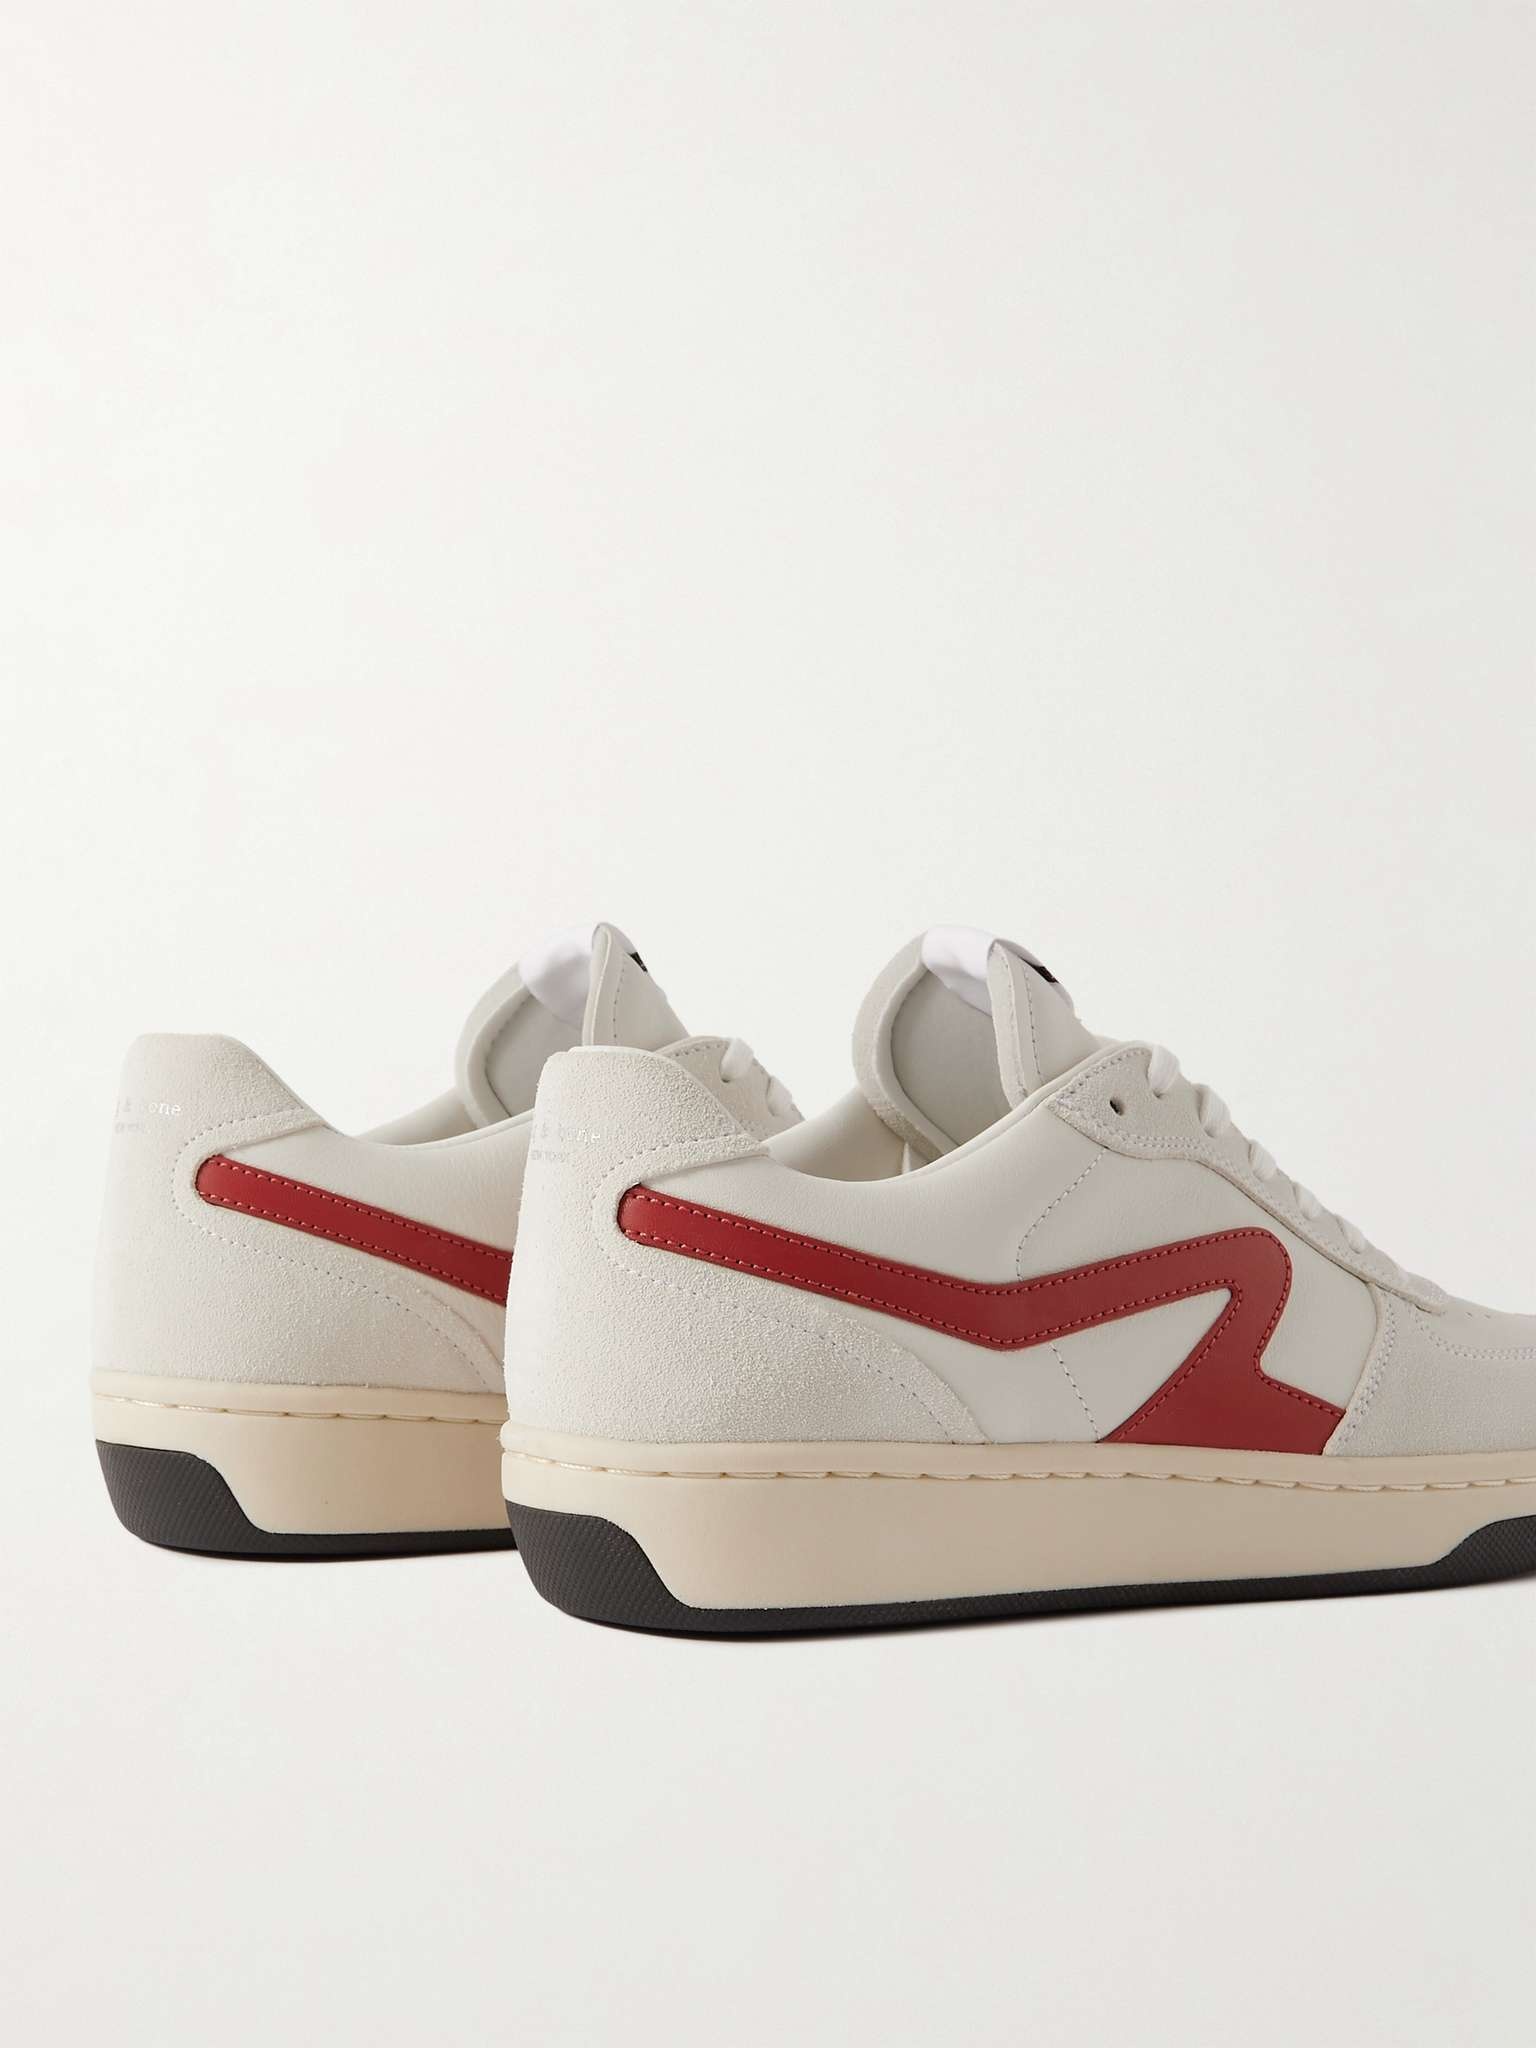 Retro Court Suede-Trimmed Leather Sneakers - 5